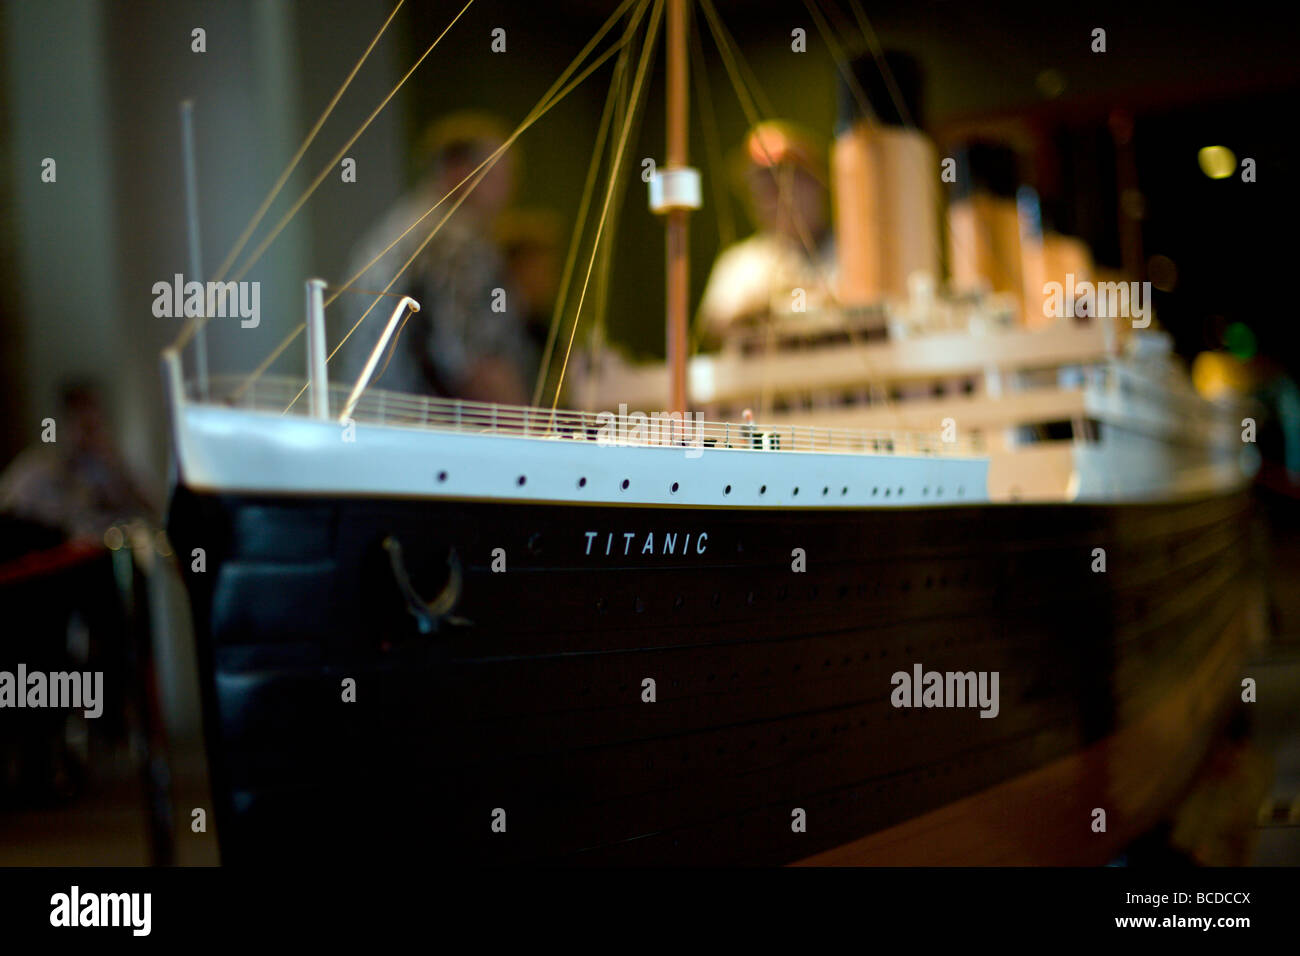 A model of the Titanic at a museum Stock Photo